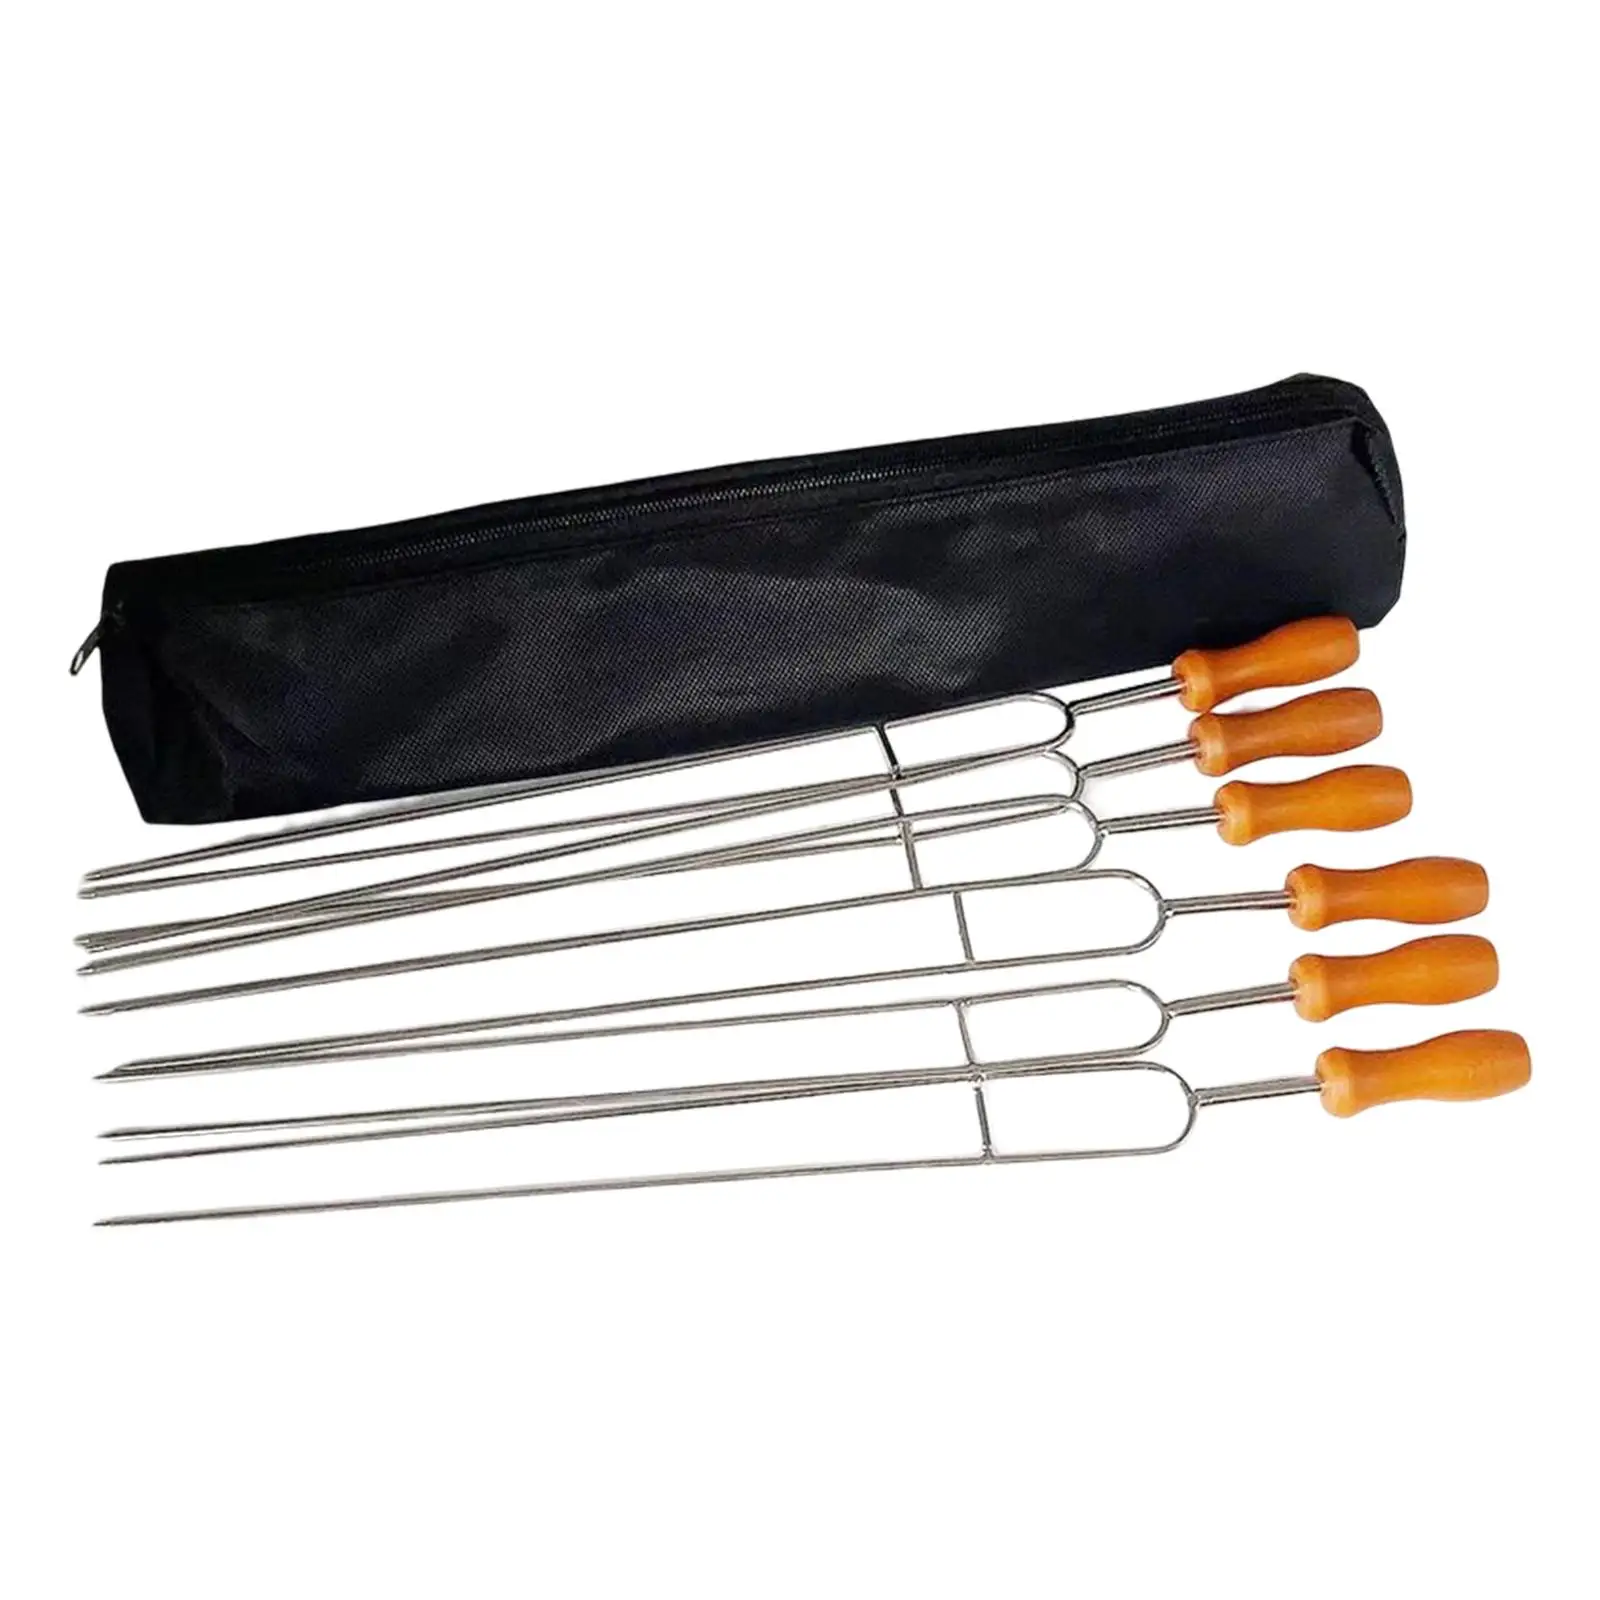 6x Roasting Sticks BBQ Skewers Barbecue Forks Camping Long Fork for Cooking